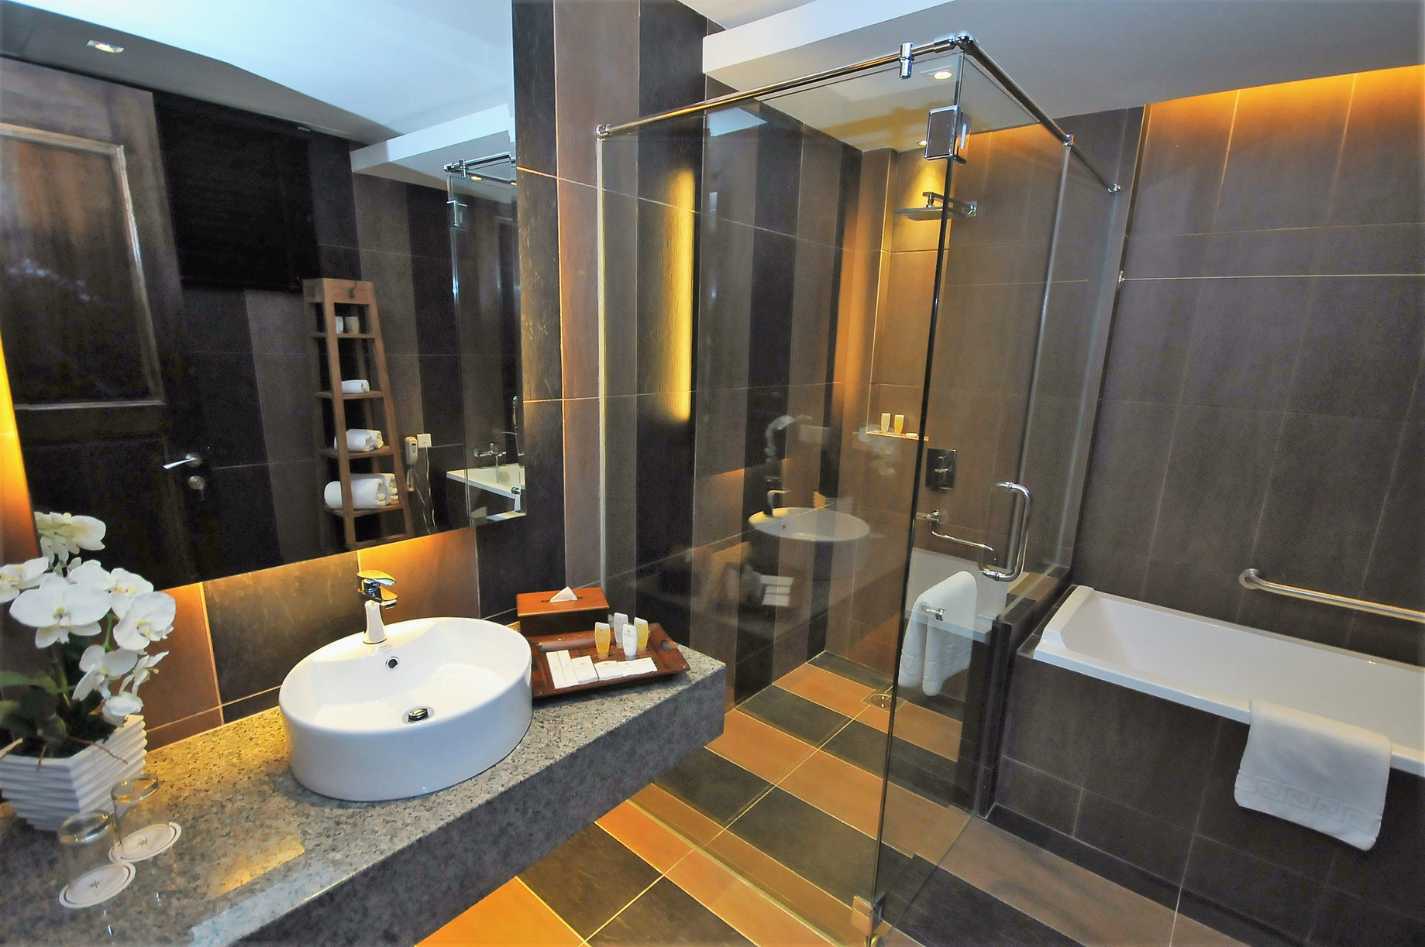 Shower with a rectangular glass panel, a white bath and a white sink. The room has a gold theme with lights coming from the perimeter of the ceiling, mirror and worktop.